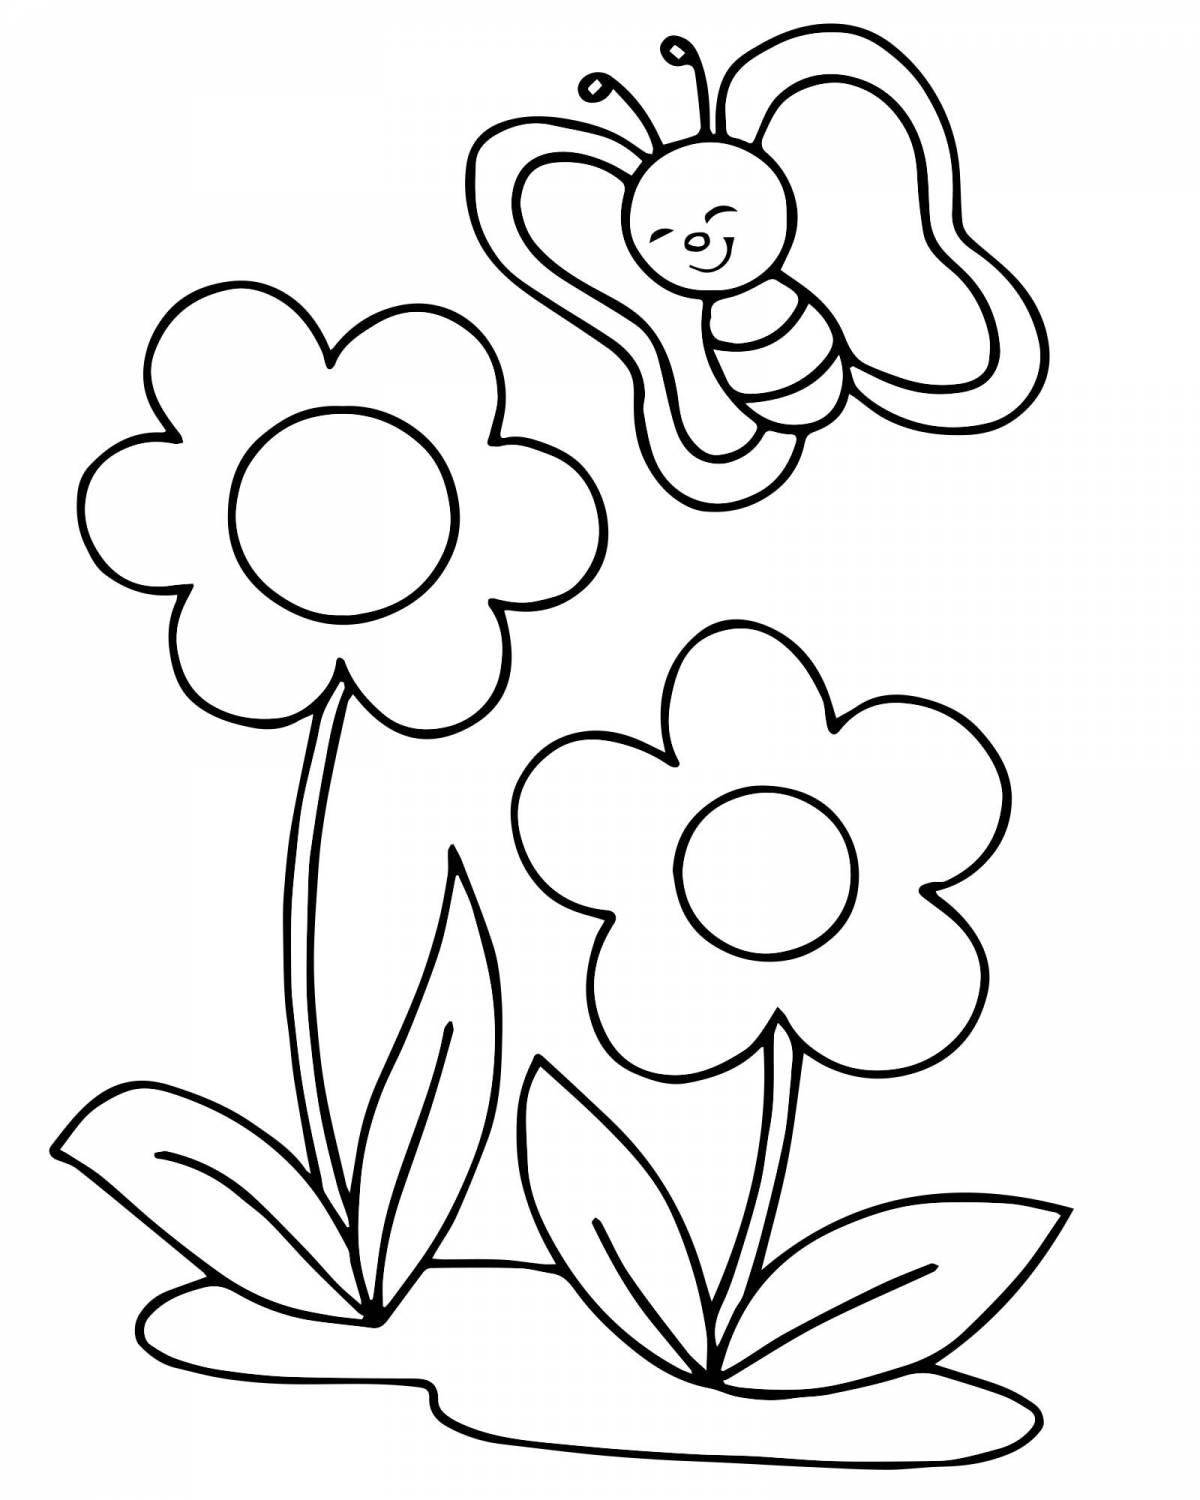 Lovely coloring flower for kids 2 3 years old